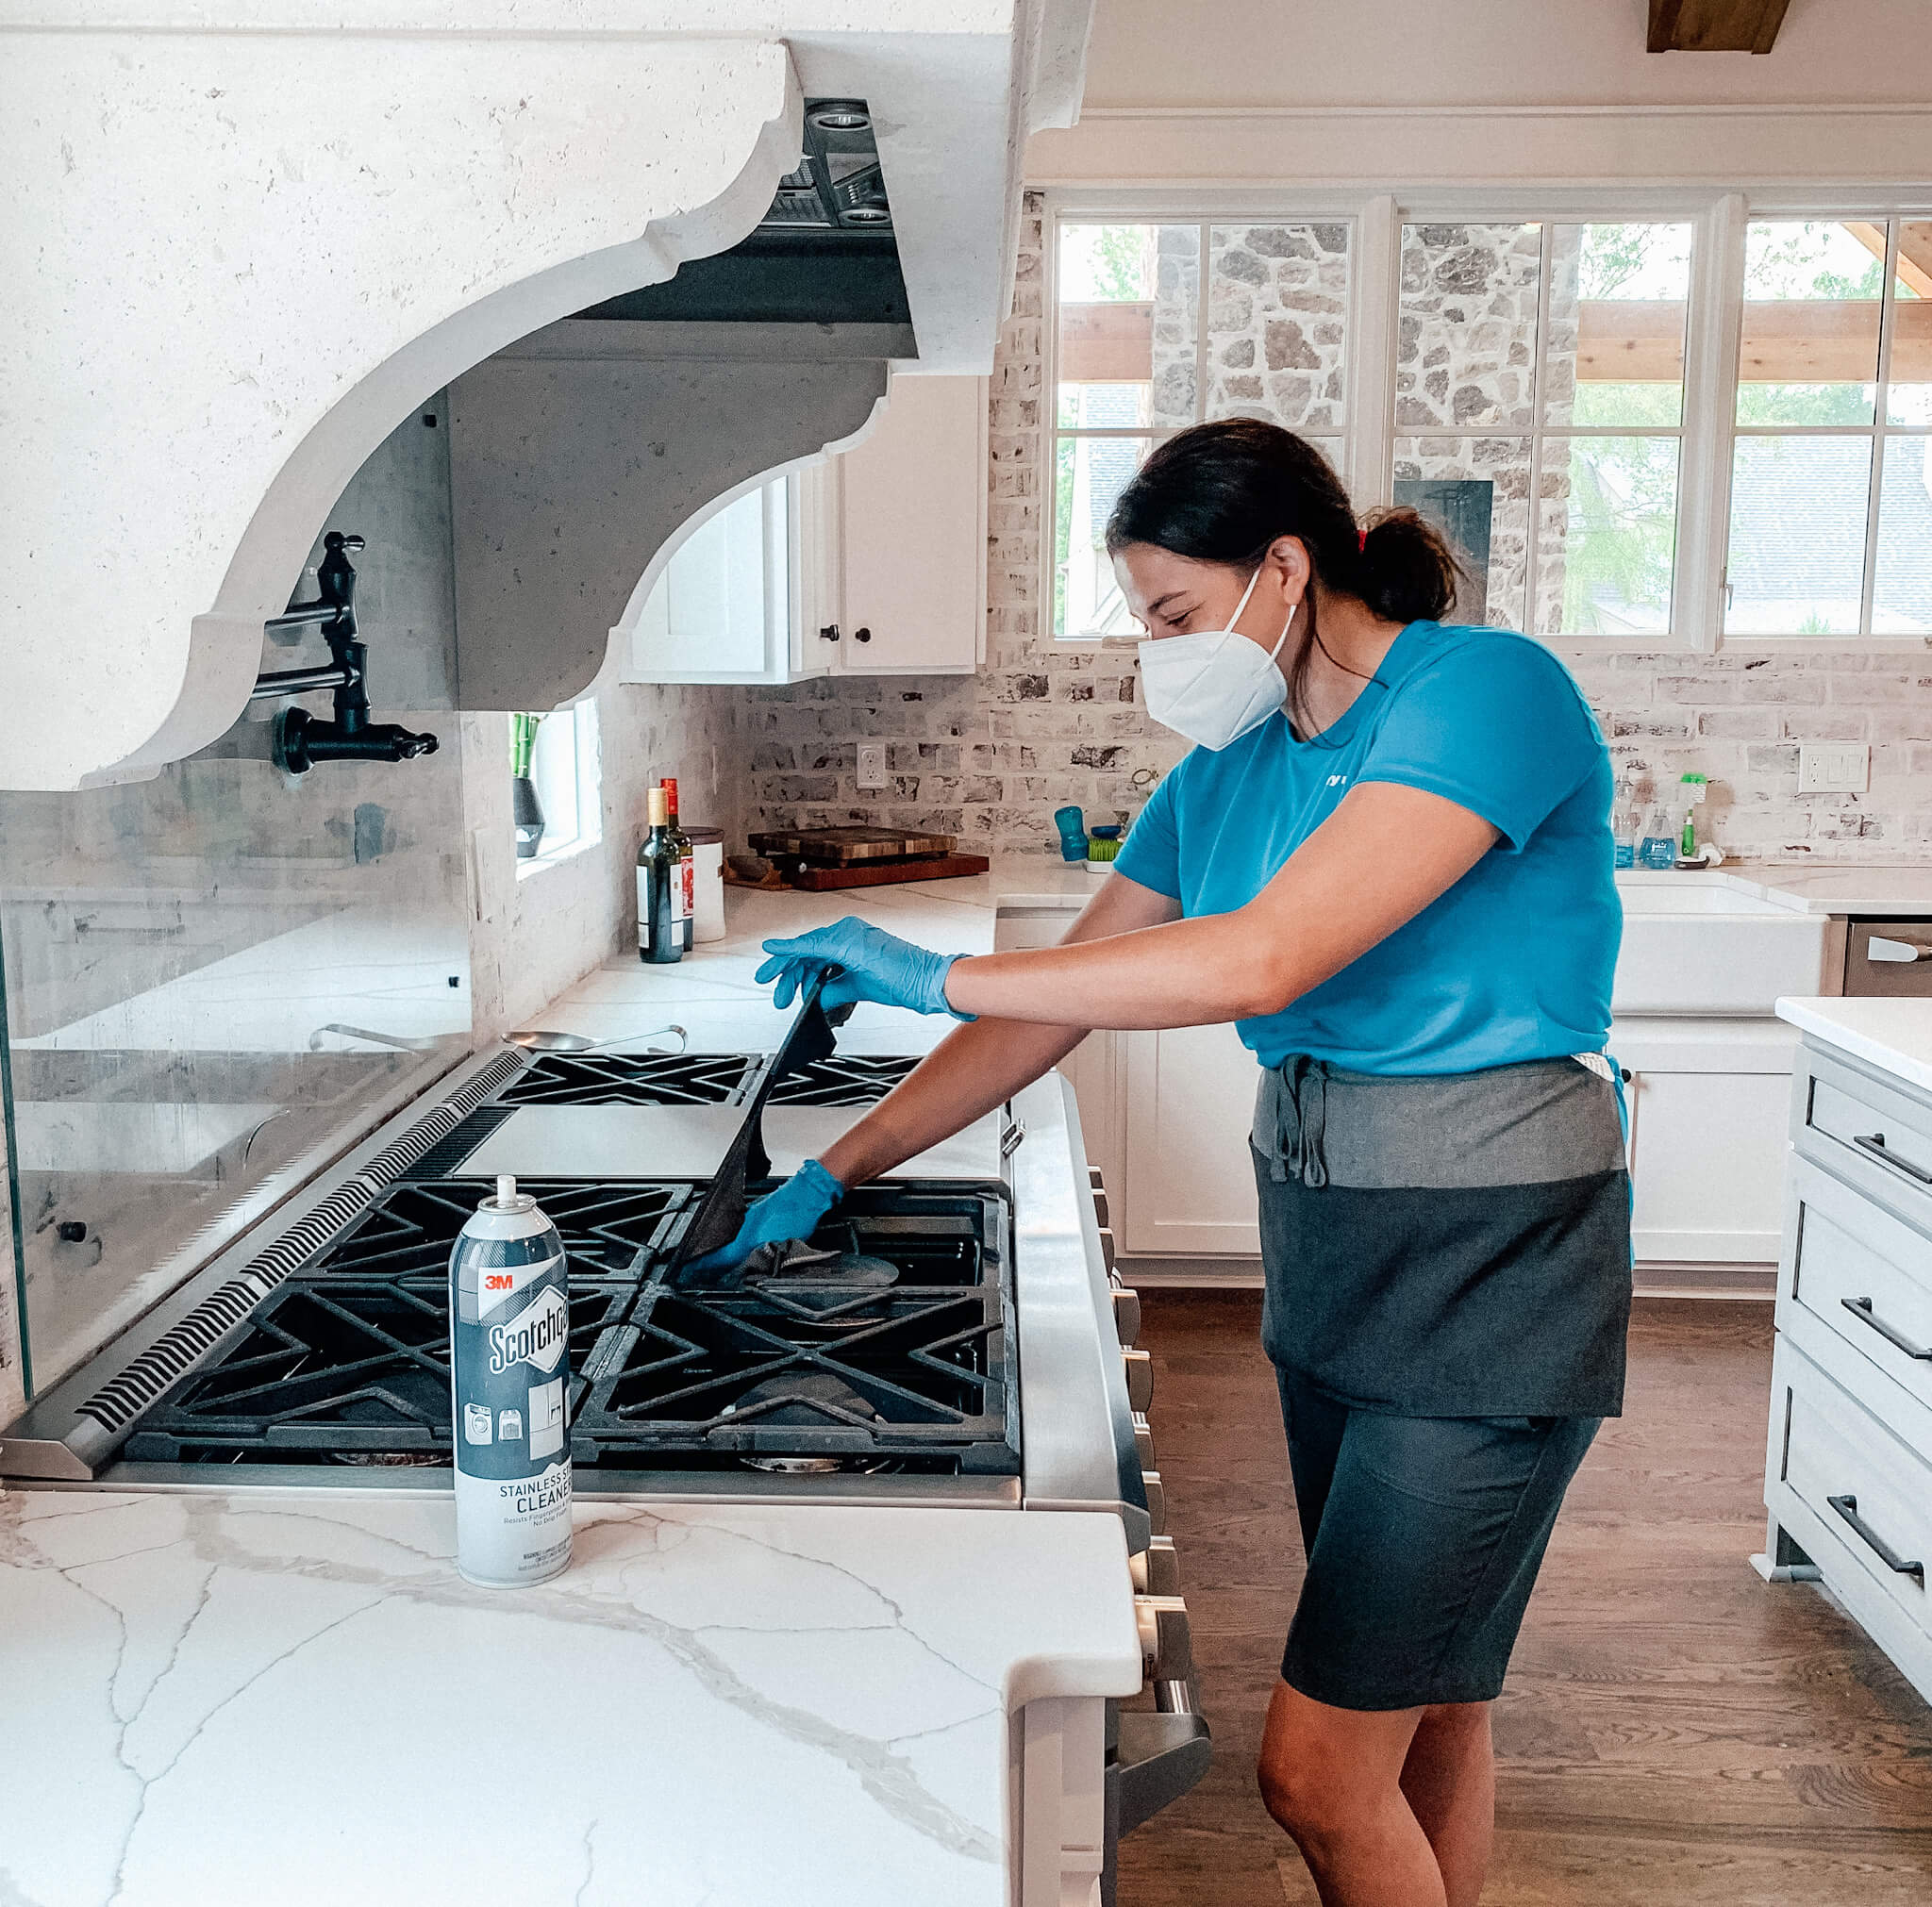 How to clean kitchen grease – expert tips for removing stubborn dirt